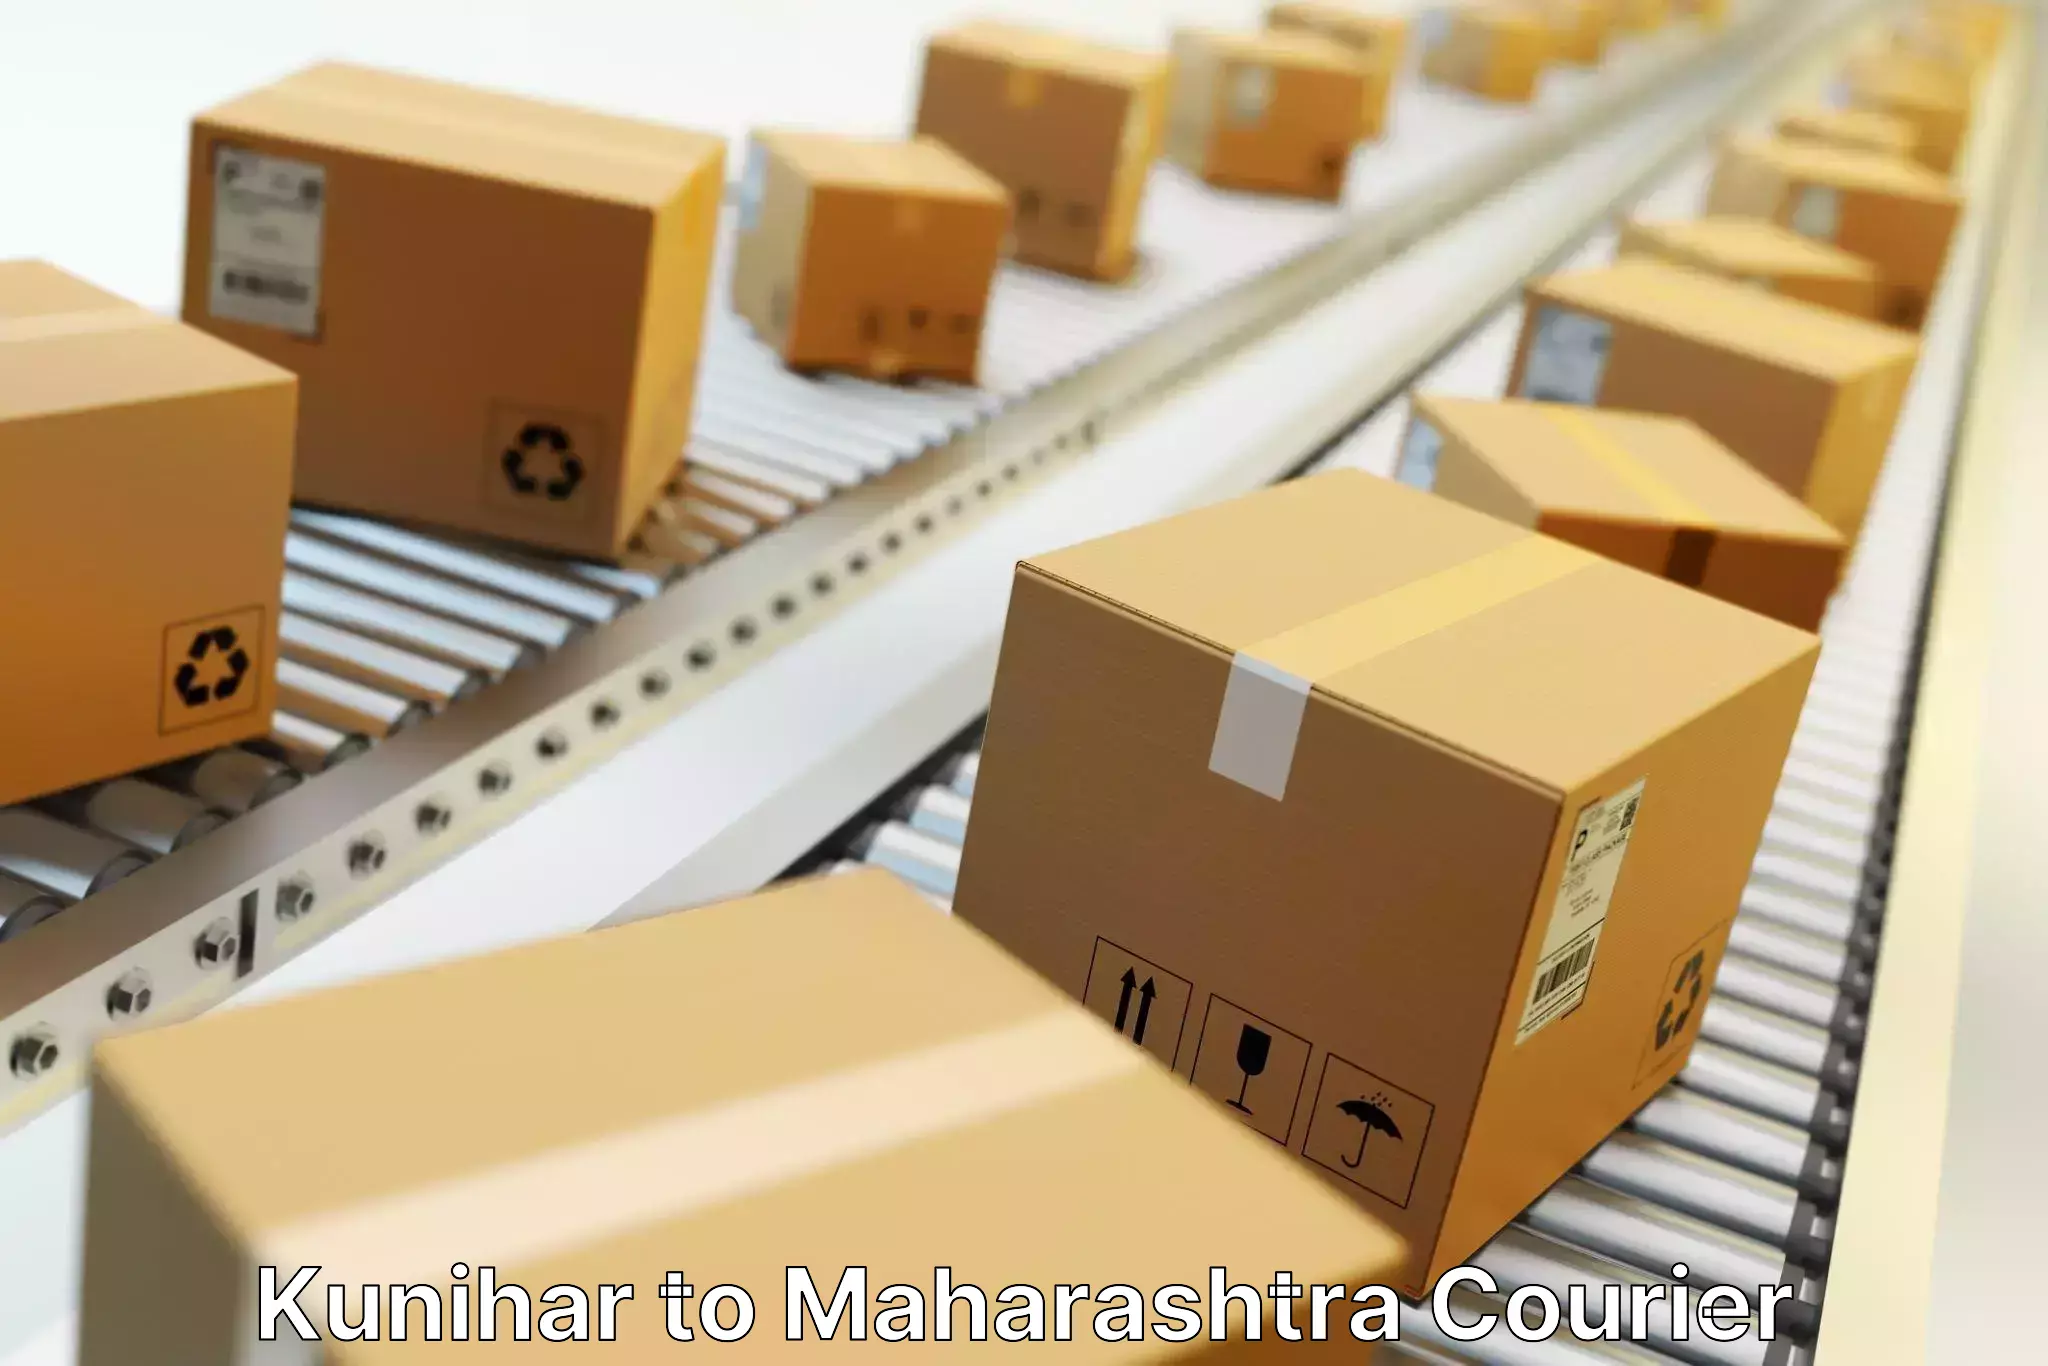 Secure shipping methods Kunihar to Pune